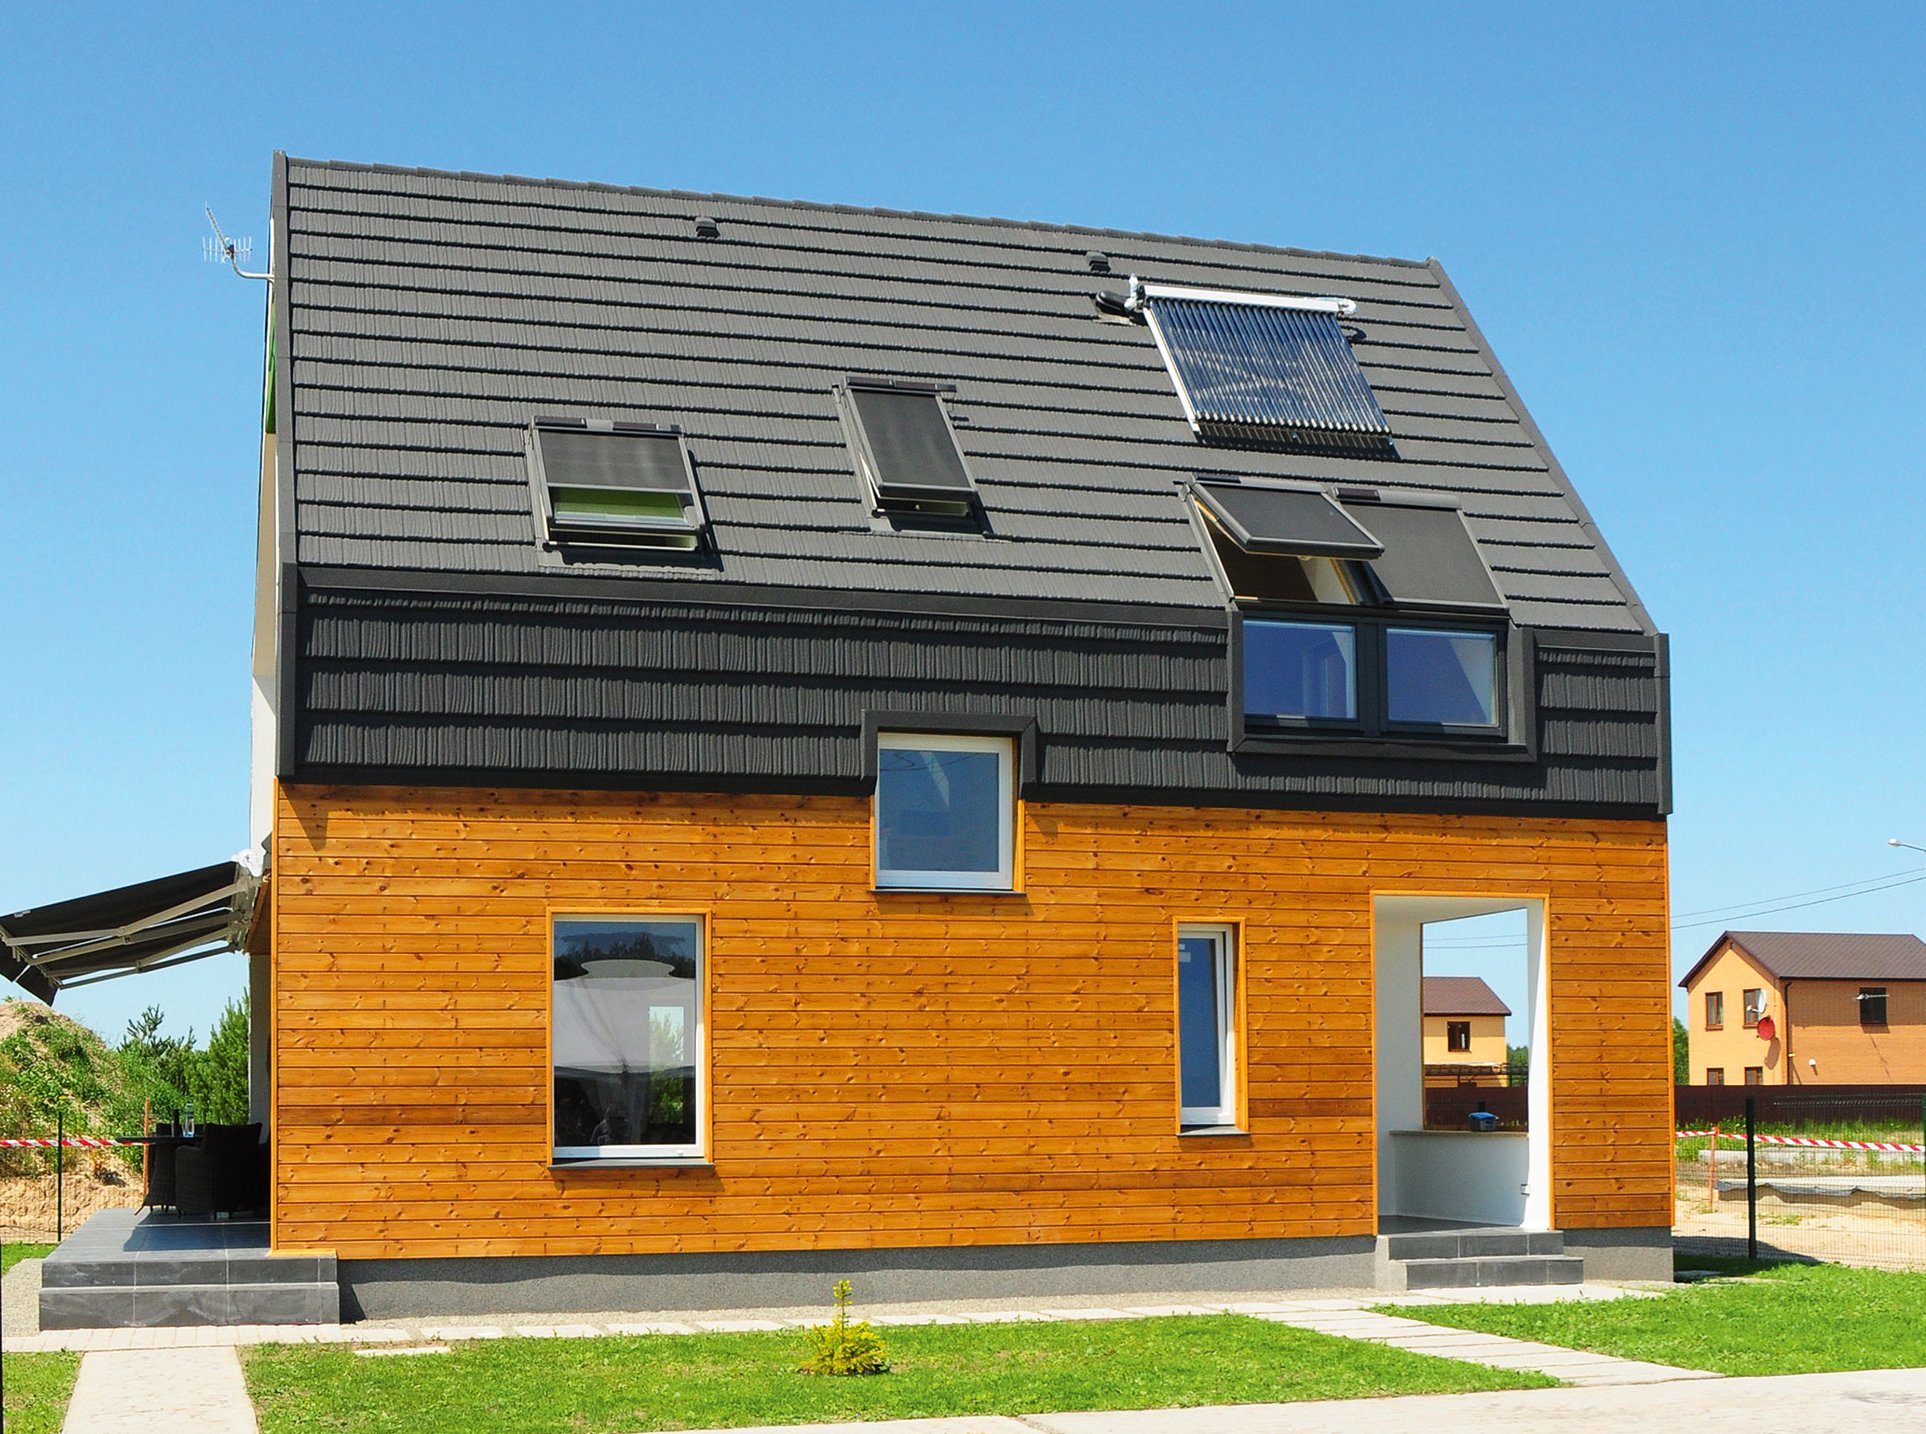 House with solar thermal panels